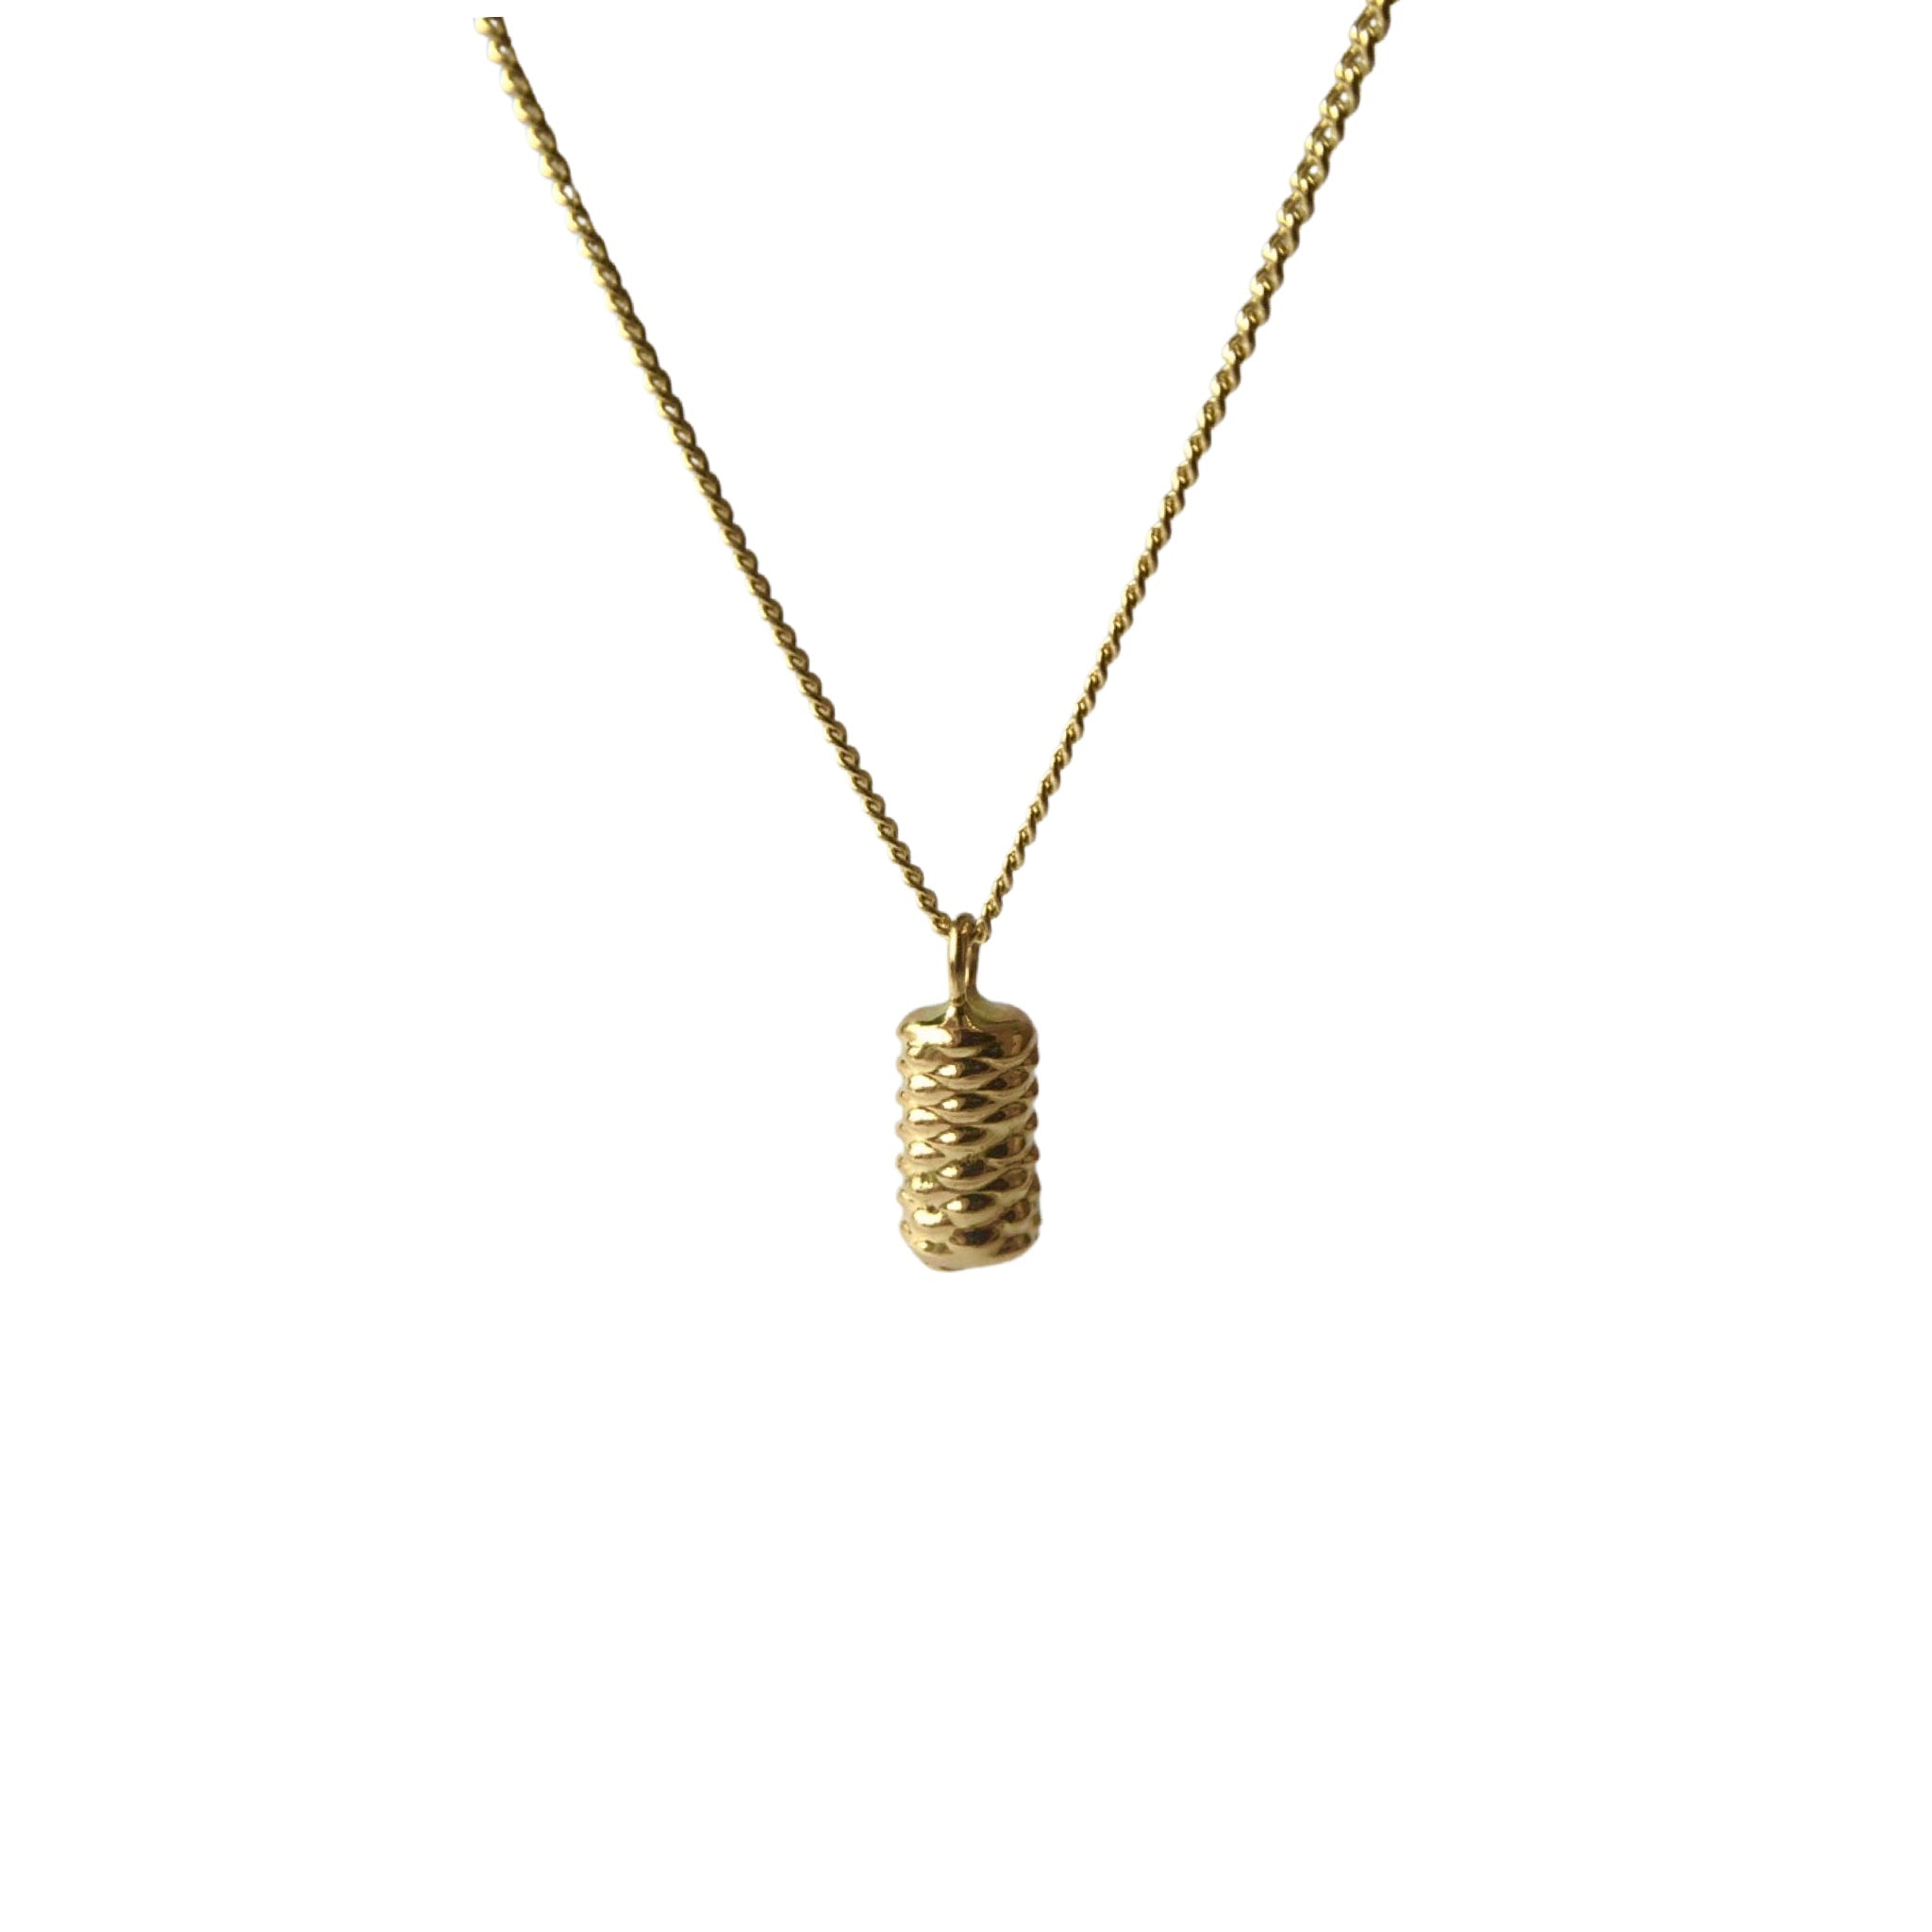 Medium Knit Collection Necklace in 18k Yellow Gold